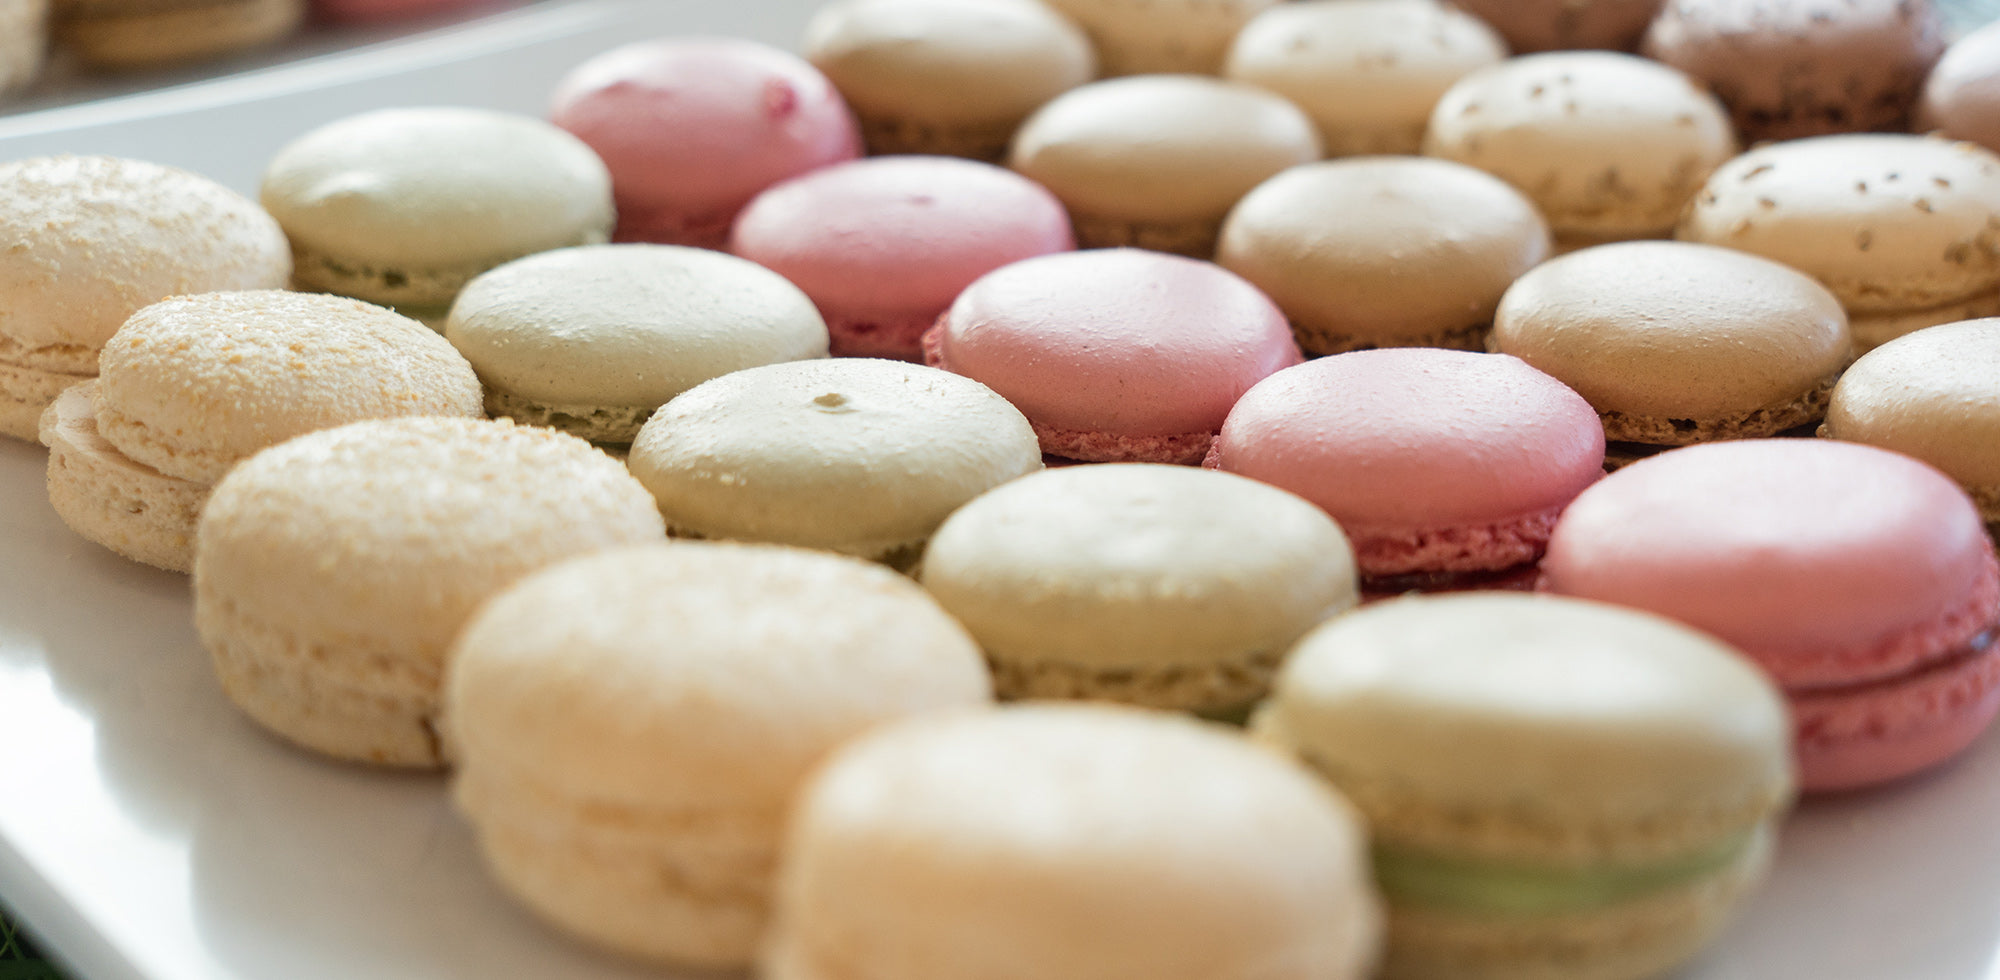 Colorful macarons arranged in rows on a plate